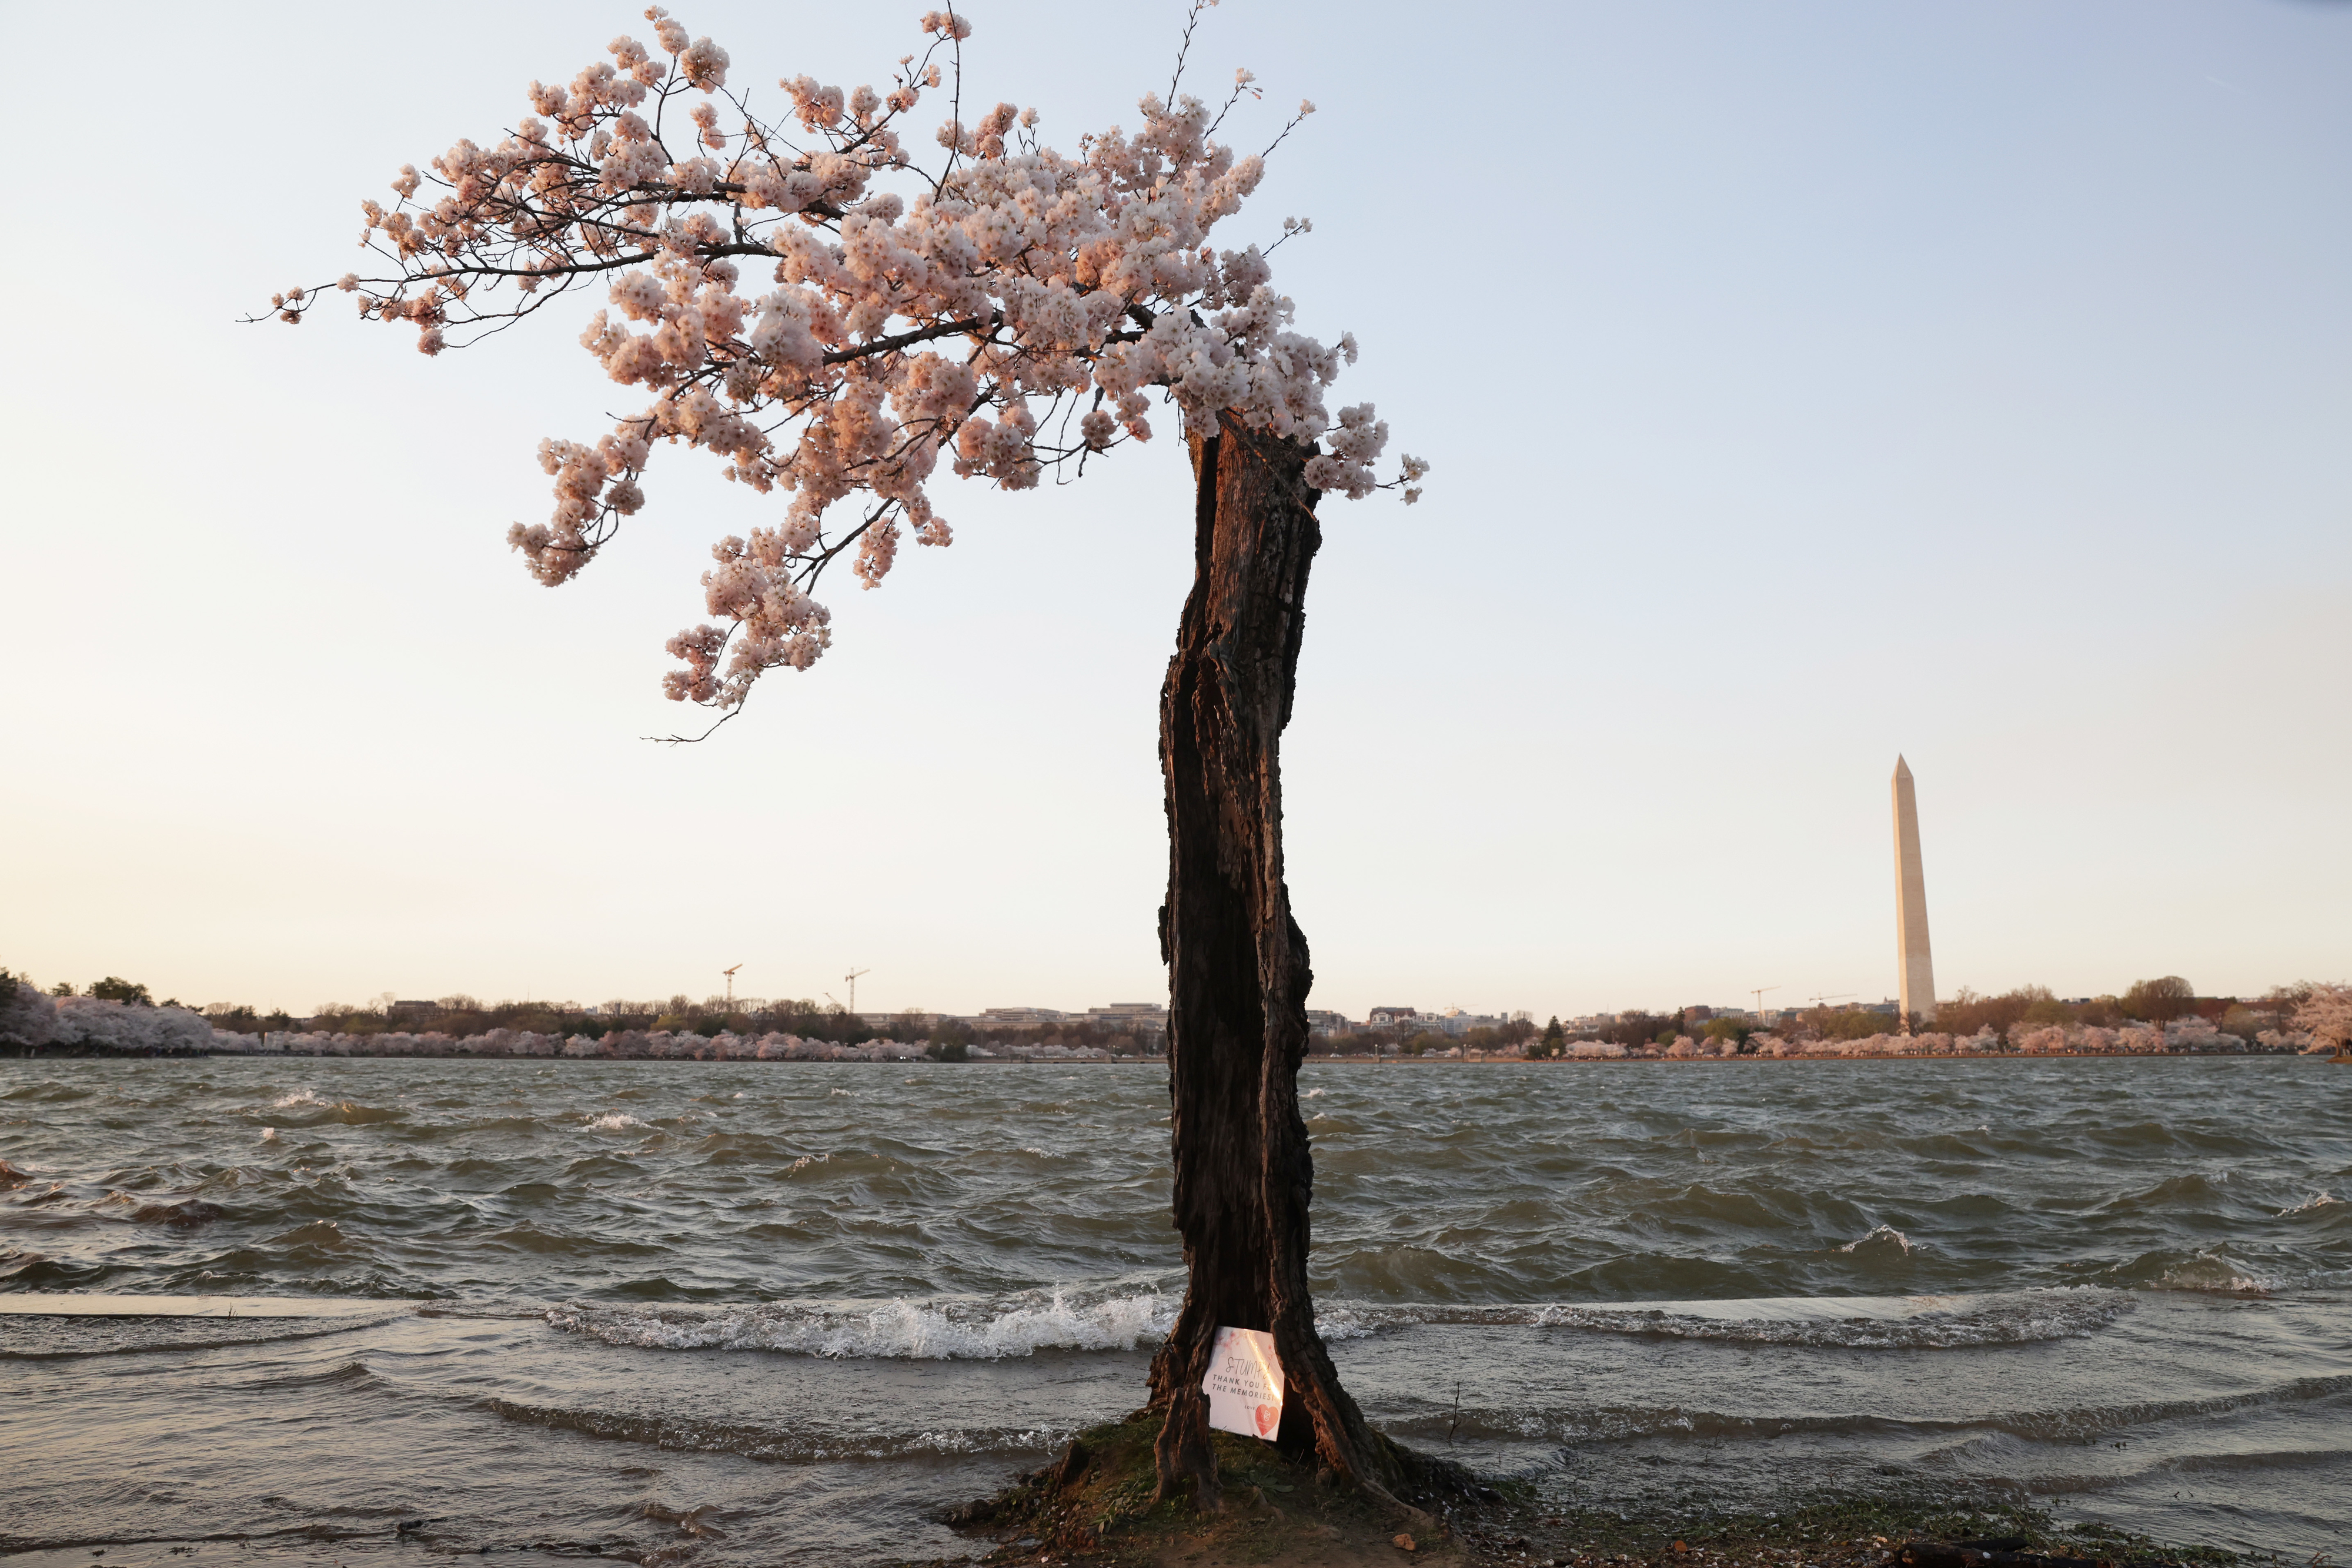 Cherry blossom tree by water with the Washington Monument in the background